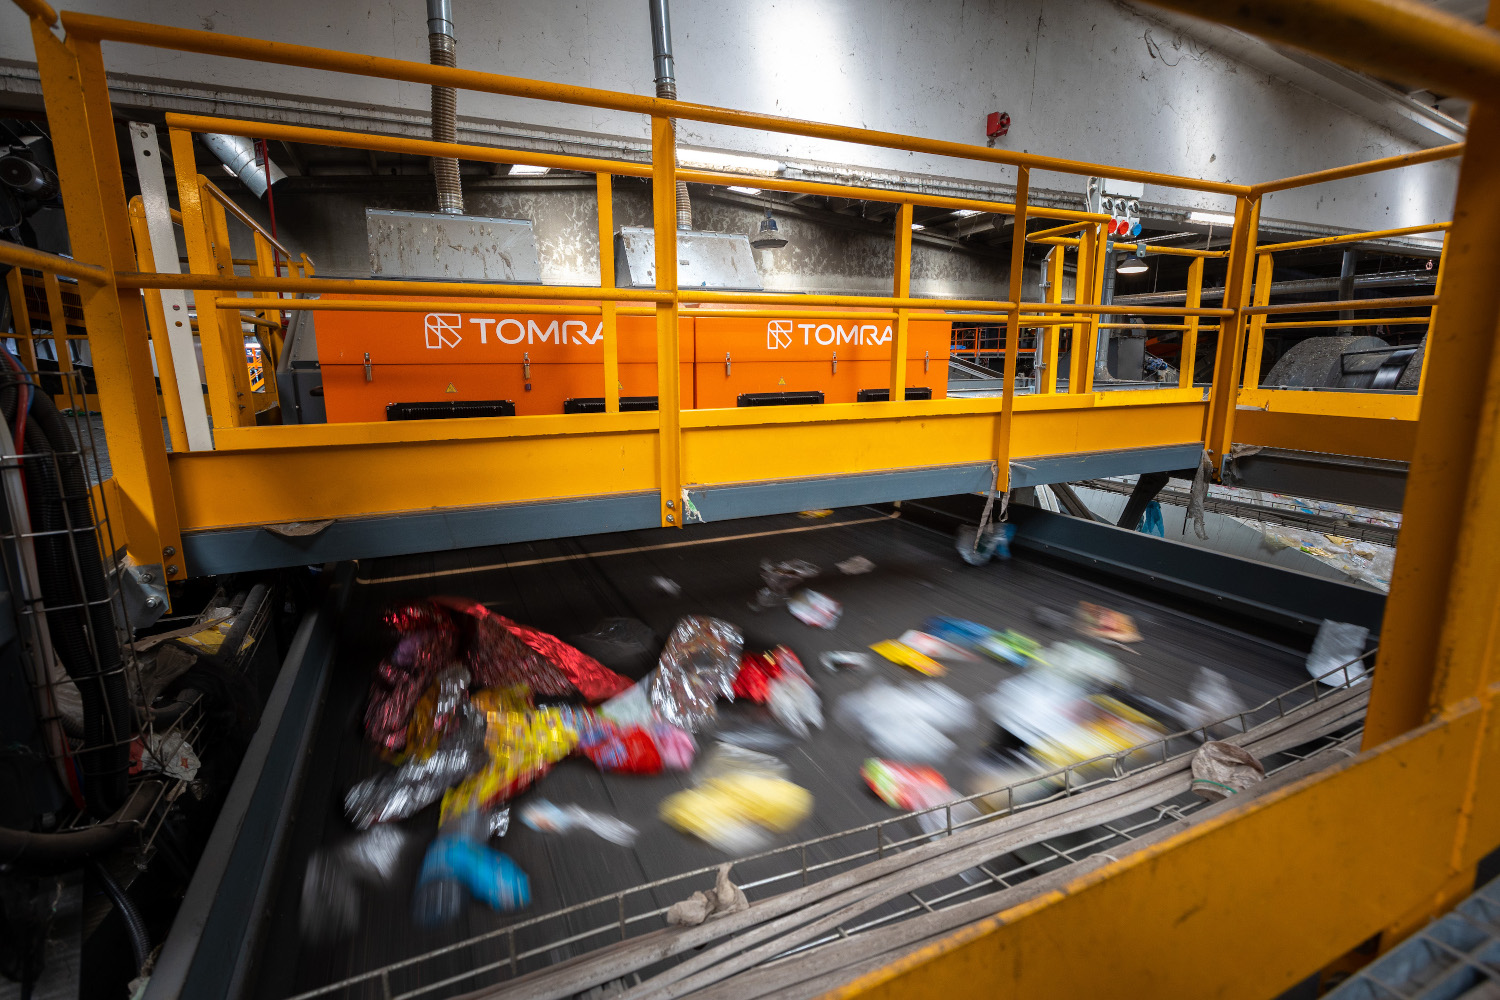 tomra autosort machine sorting waste recycling